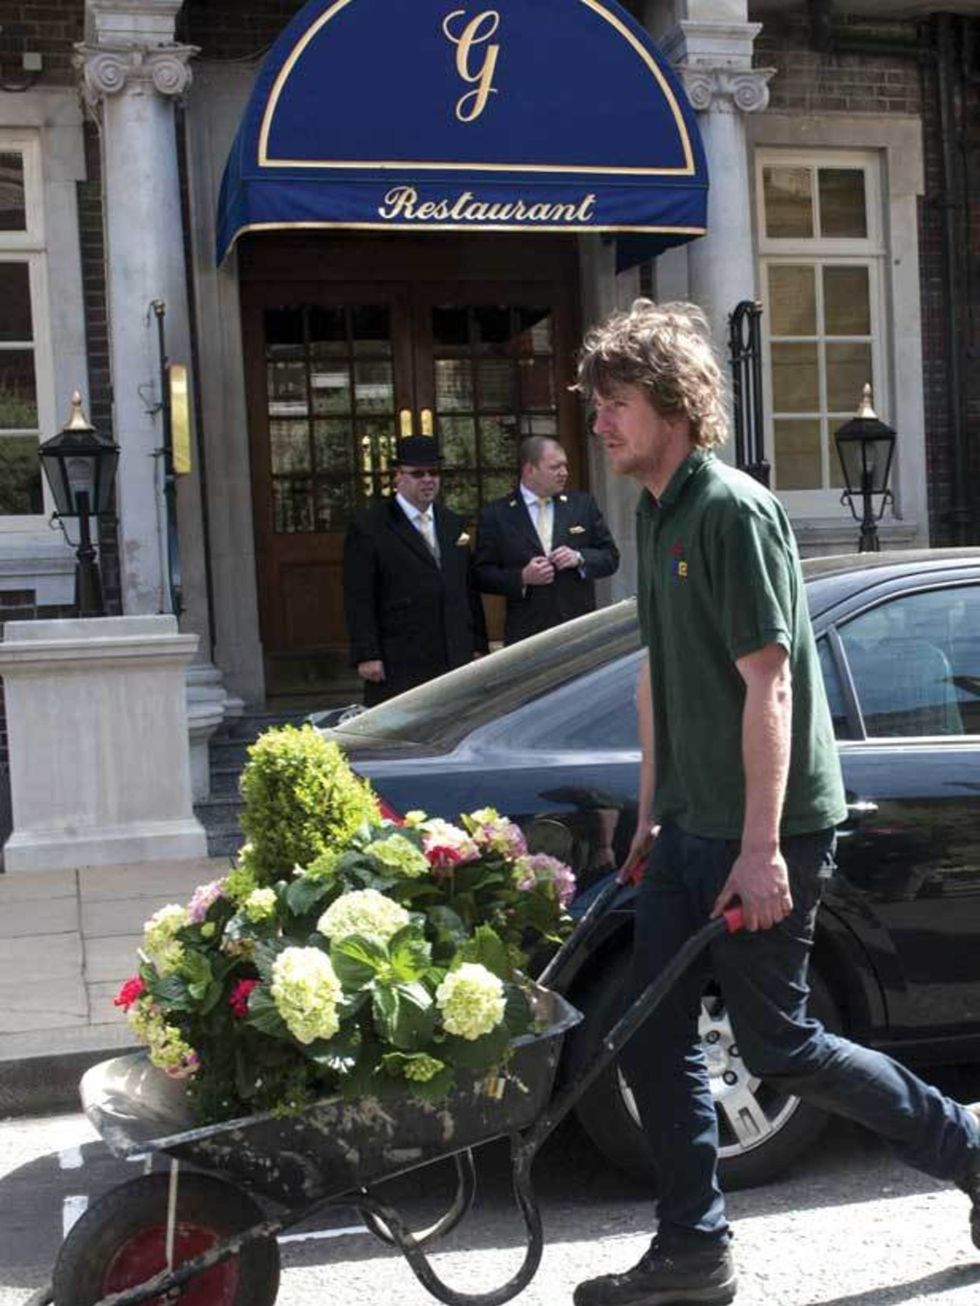 <p>Flowers being delivered to The Goring Hotel for tomorrow's eagerly anticipated Royal Wedding</p>